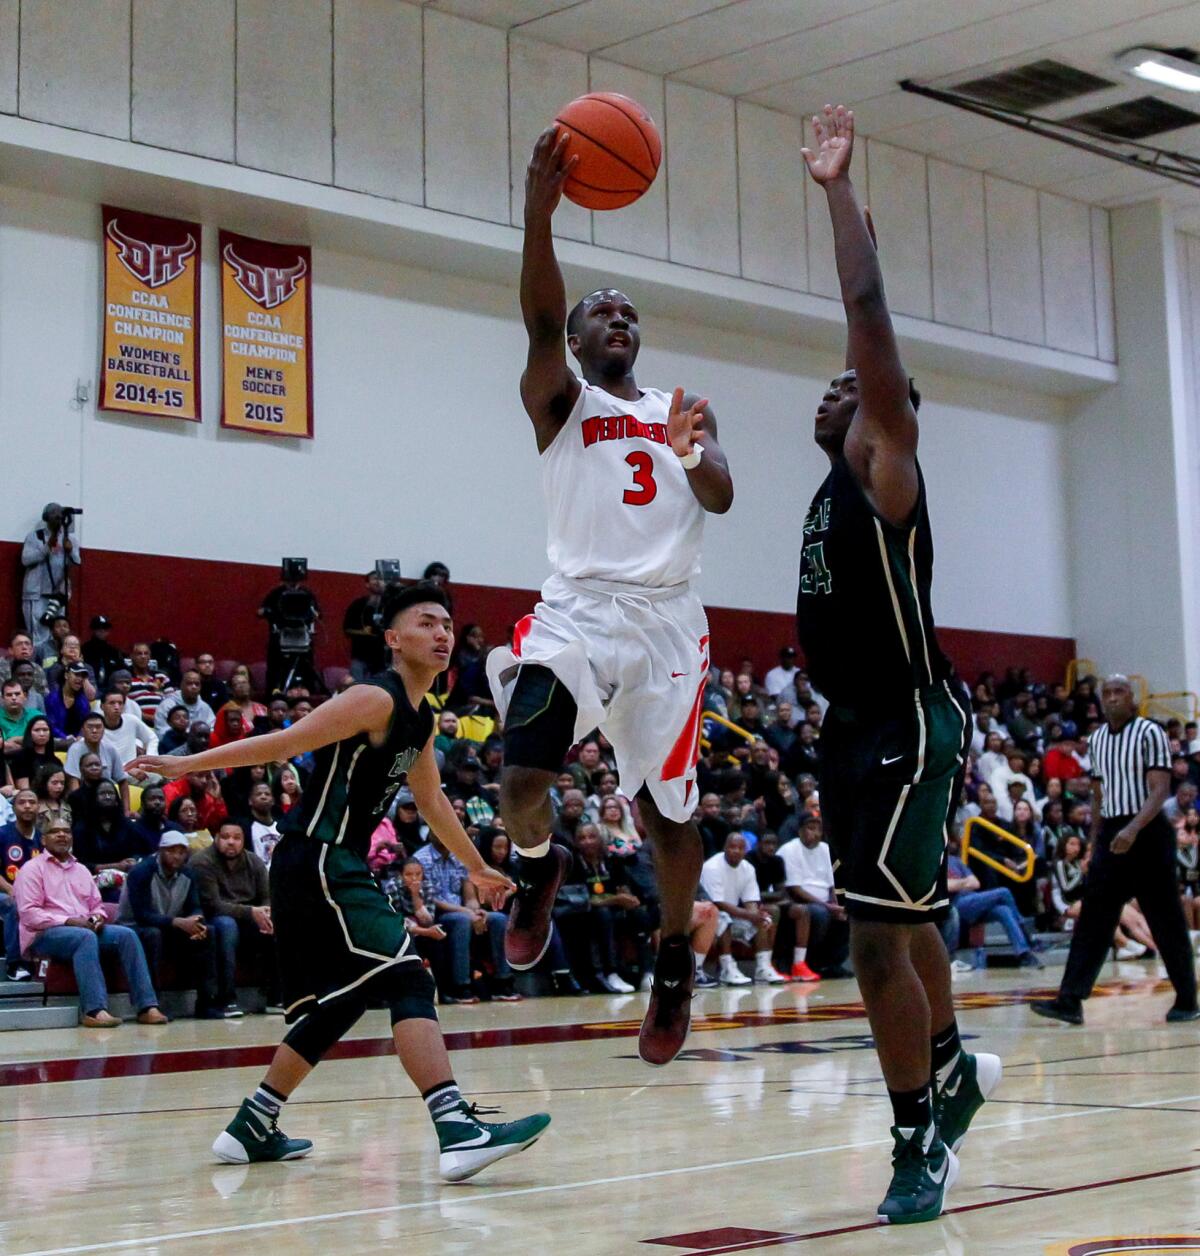 Westchester's Terrell Waiters makes a layup against Narbonne during the City Section Open Division boys basketball final on March 5.